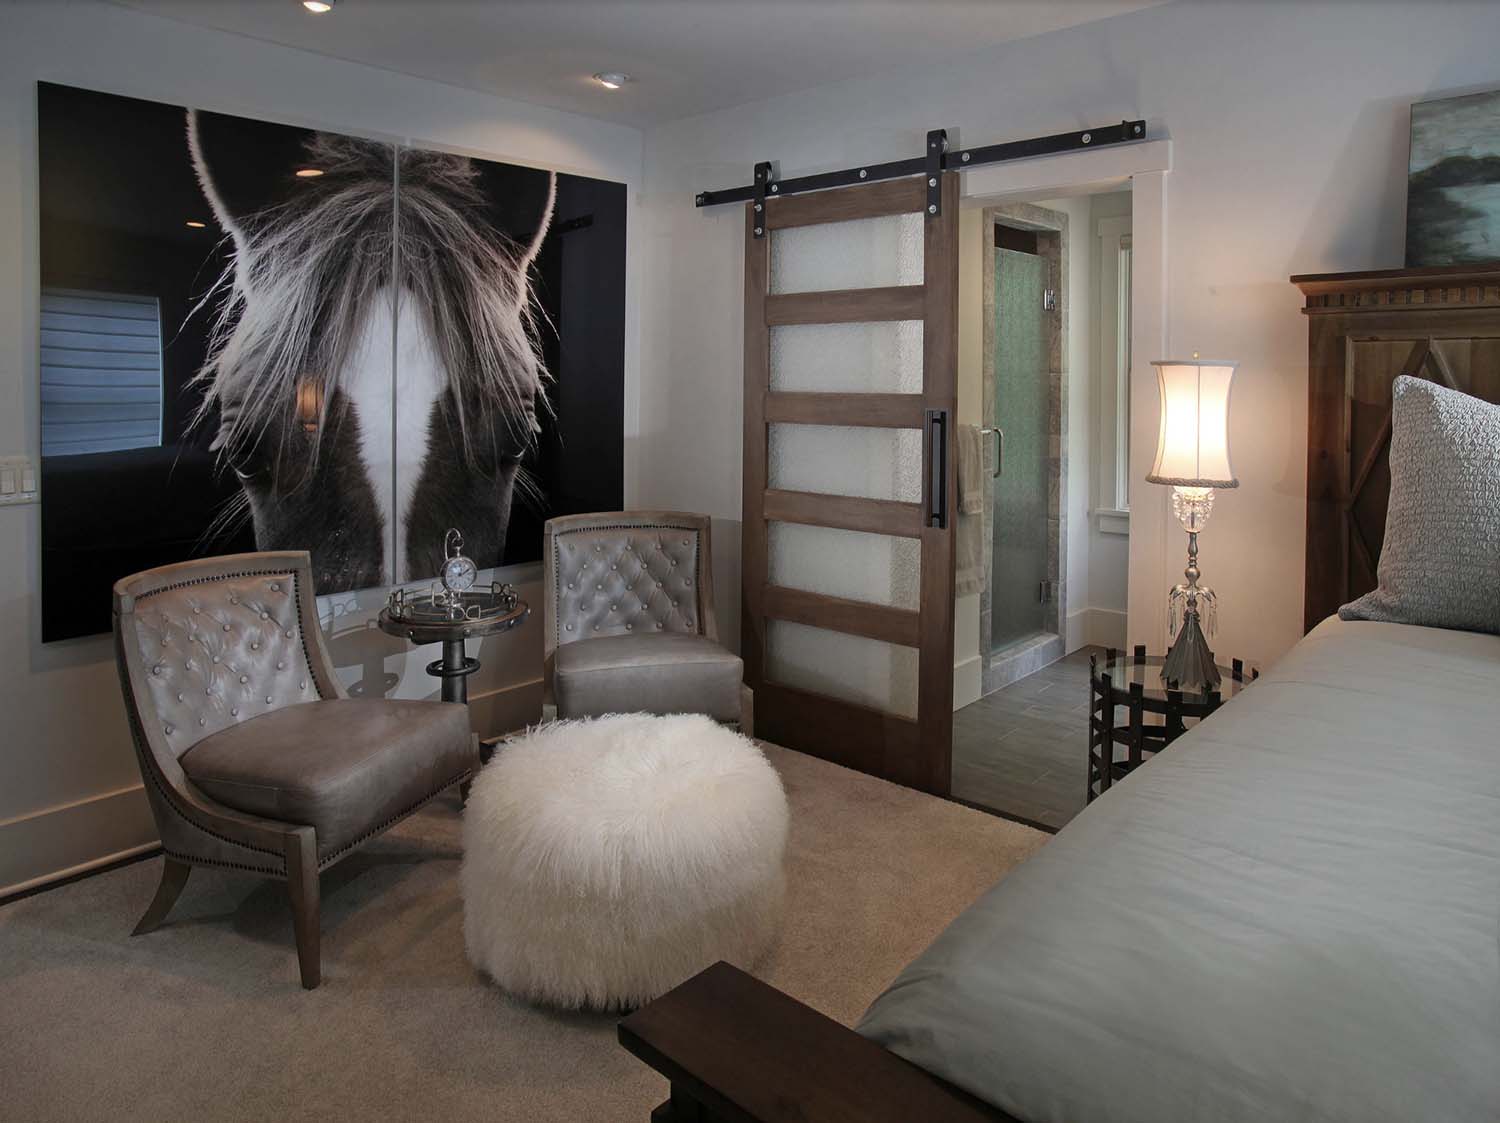 modern rustic guest bedroom with a craftsman style barn door leading into the bathroom